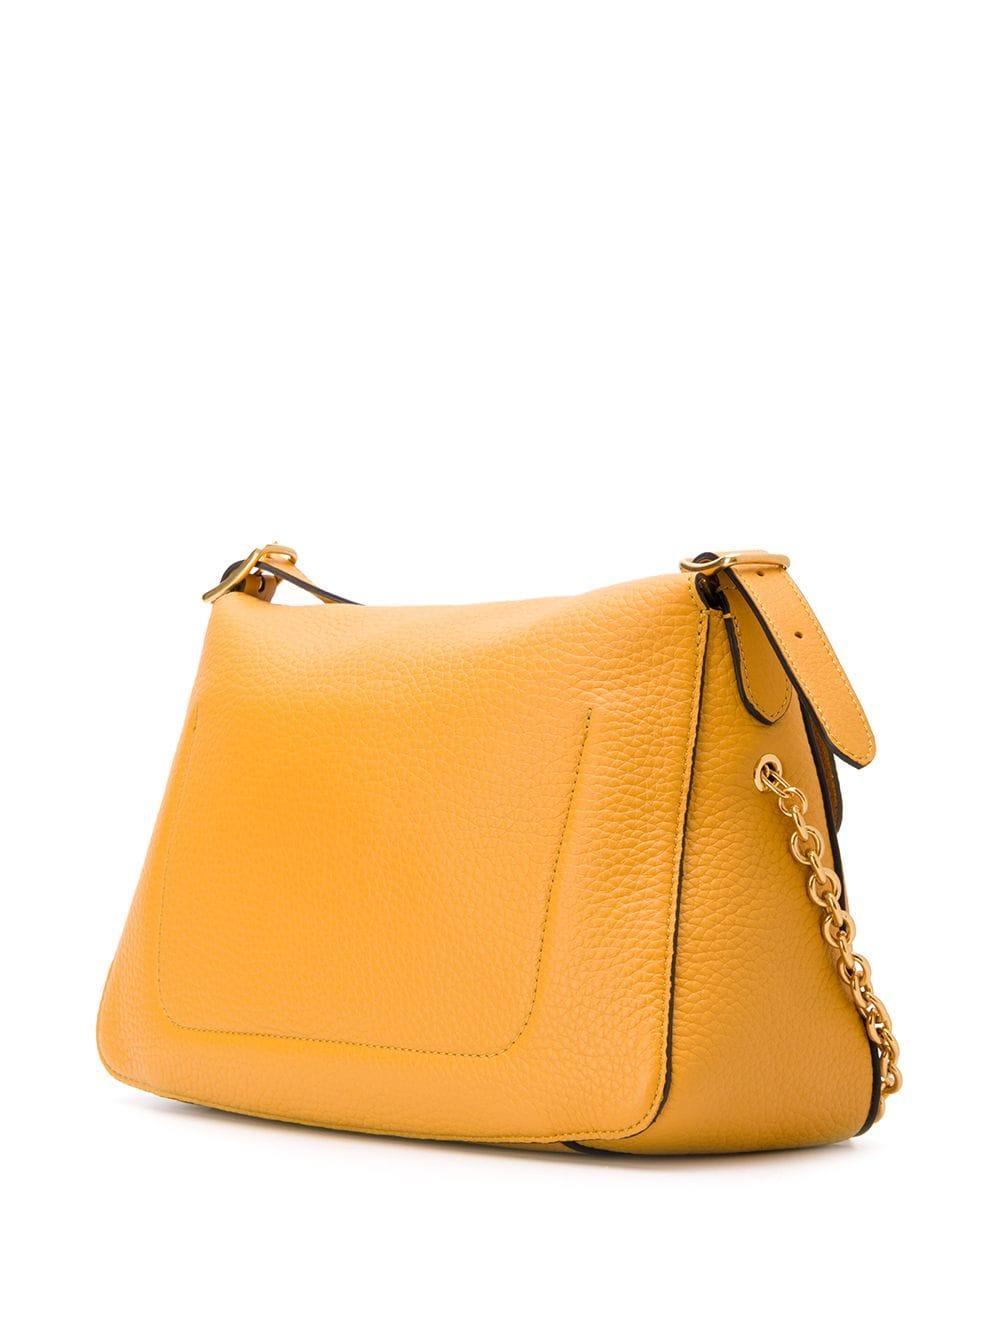 Mulberry Keeley Shoulder Bag in Yellow - Lyst